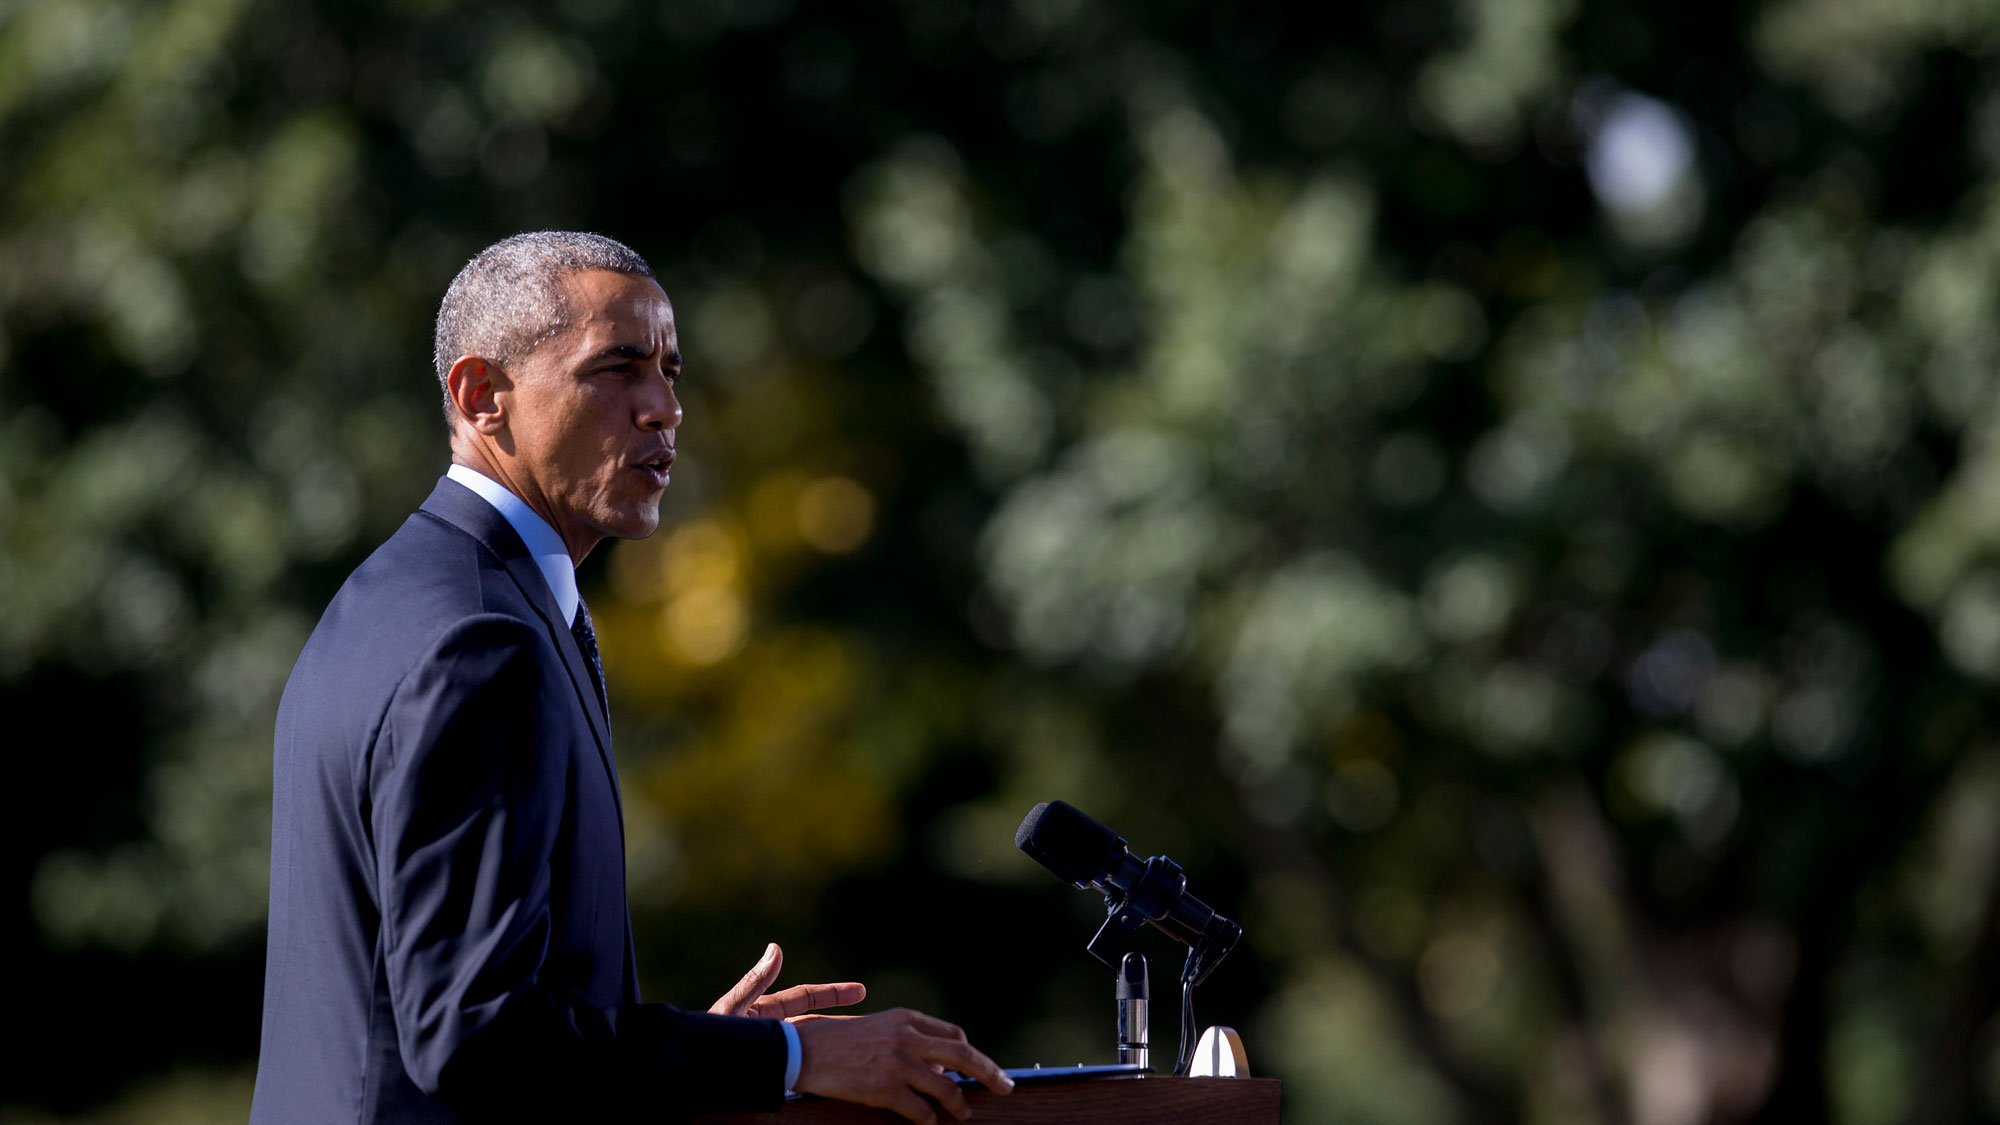 U.S. President Barack Obama speaks to the media on the South Lawn of the White House in Washington, D.C. U.S., on Tuesday, Sept. 23, 2014
